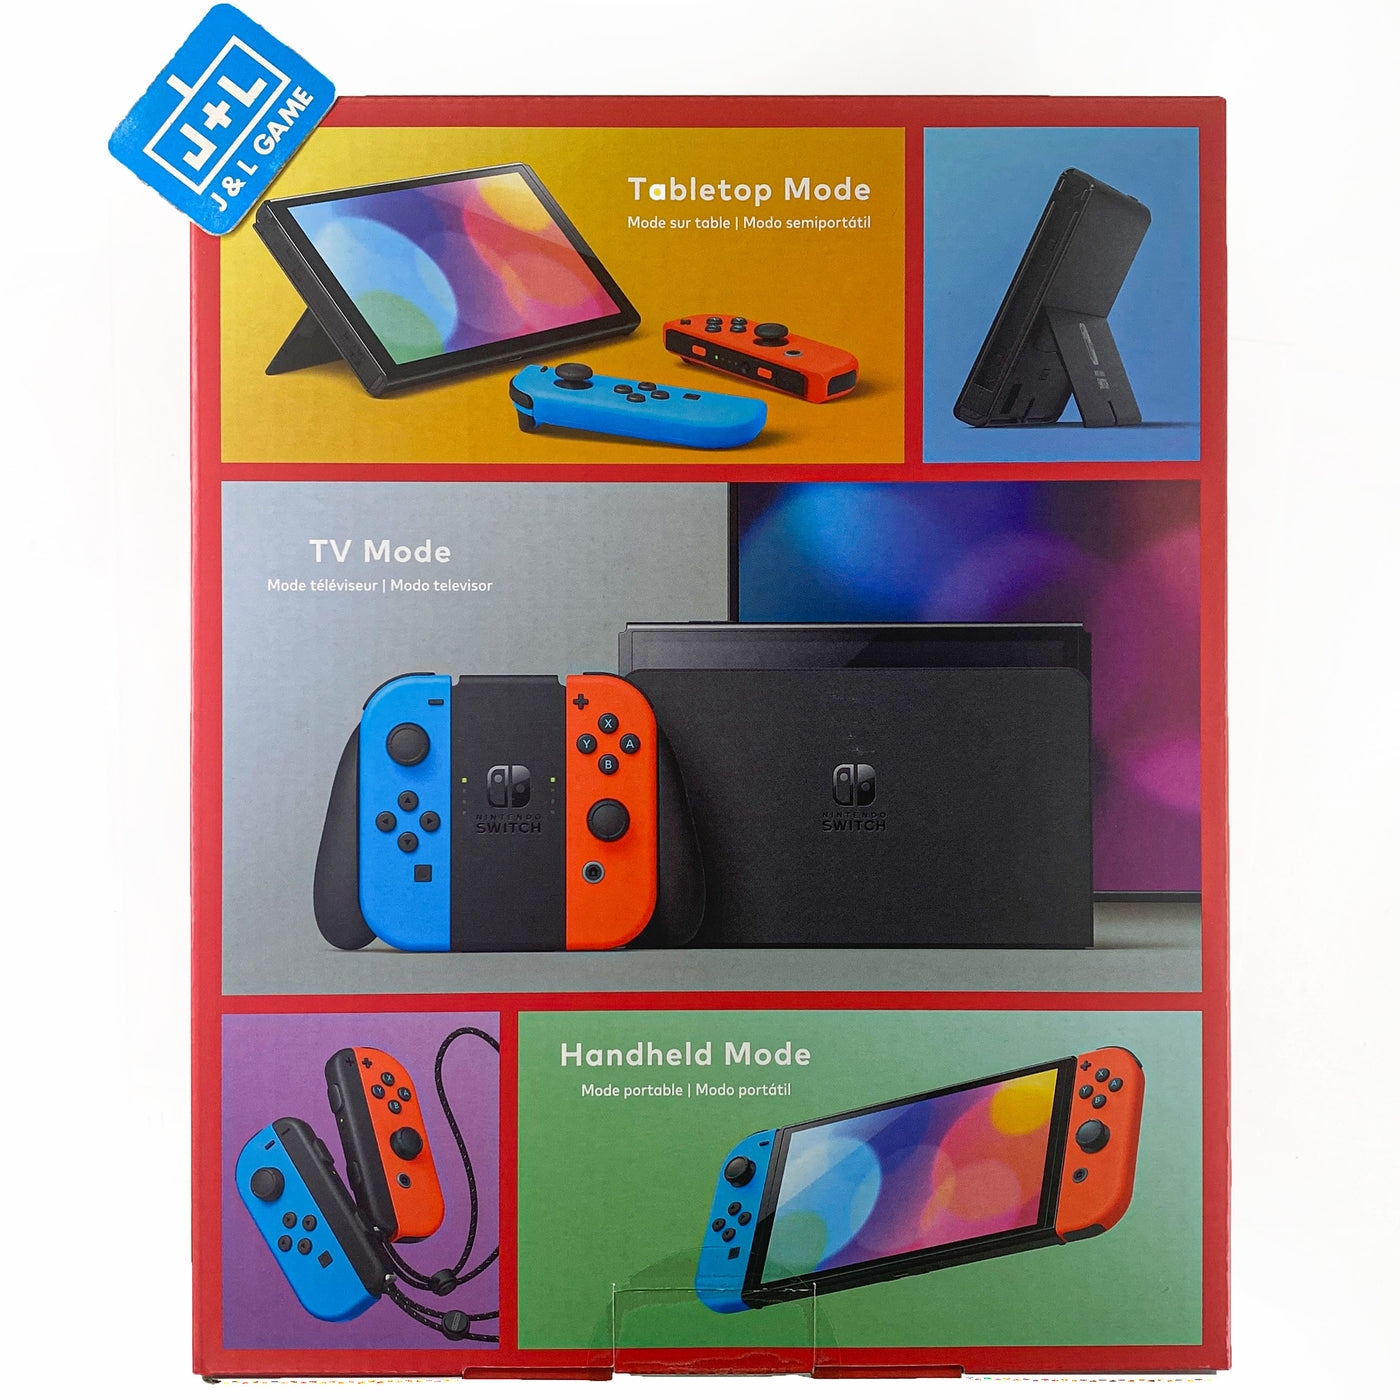 Nintendo Switch - Oled Model With Neon Red & Neon Blue Joy-con : Target